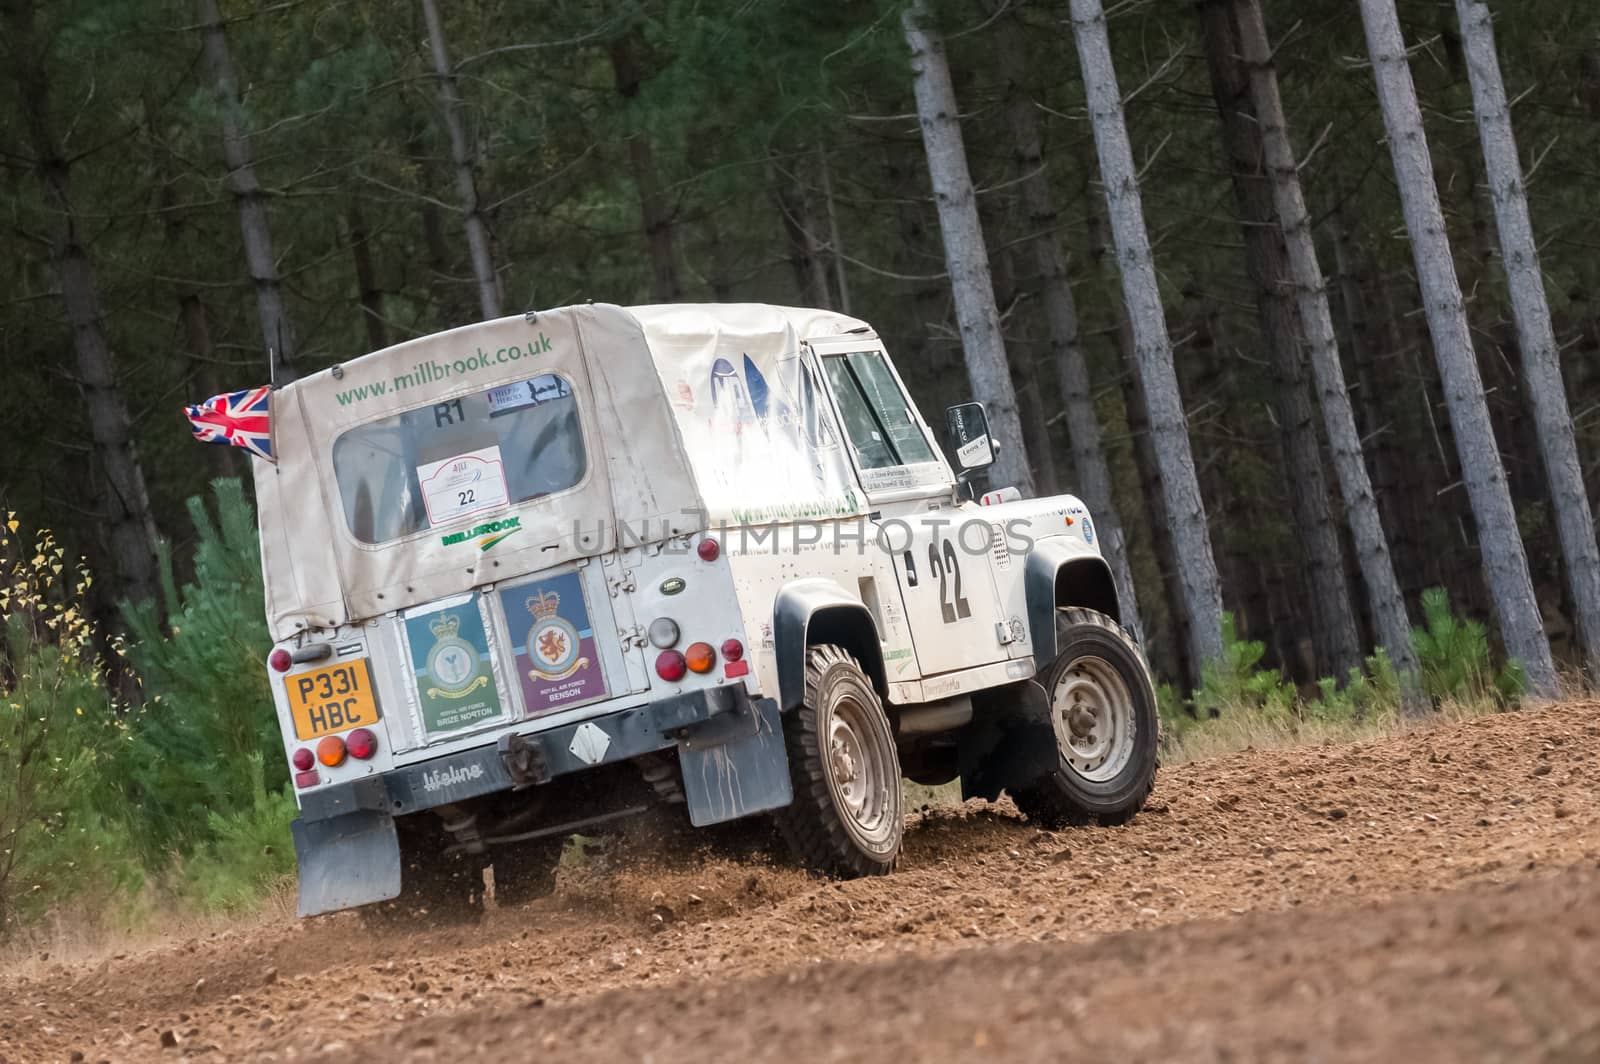 Bramshill Forest, UK - November 3, 2012: Over-steer by RAF pilot Flt. Lt. Steve Partridge driving a Land Rover Wolf on the Warren stage of the MSA Tempest Rally in Bramshill Forest, UK